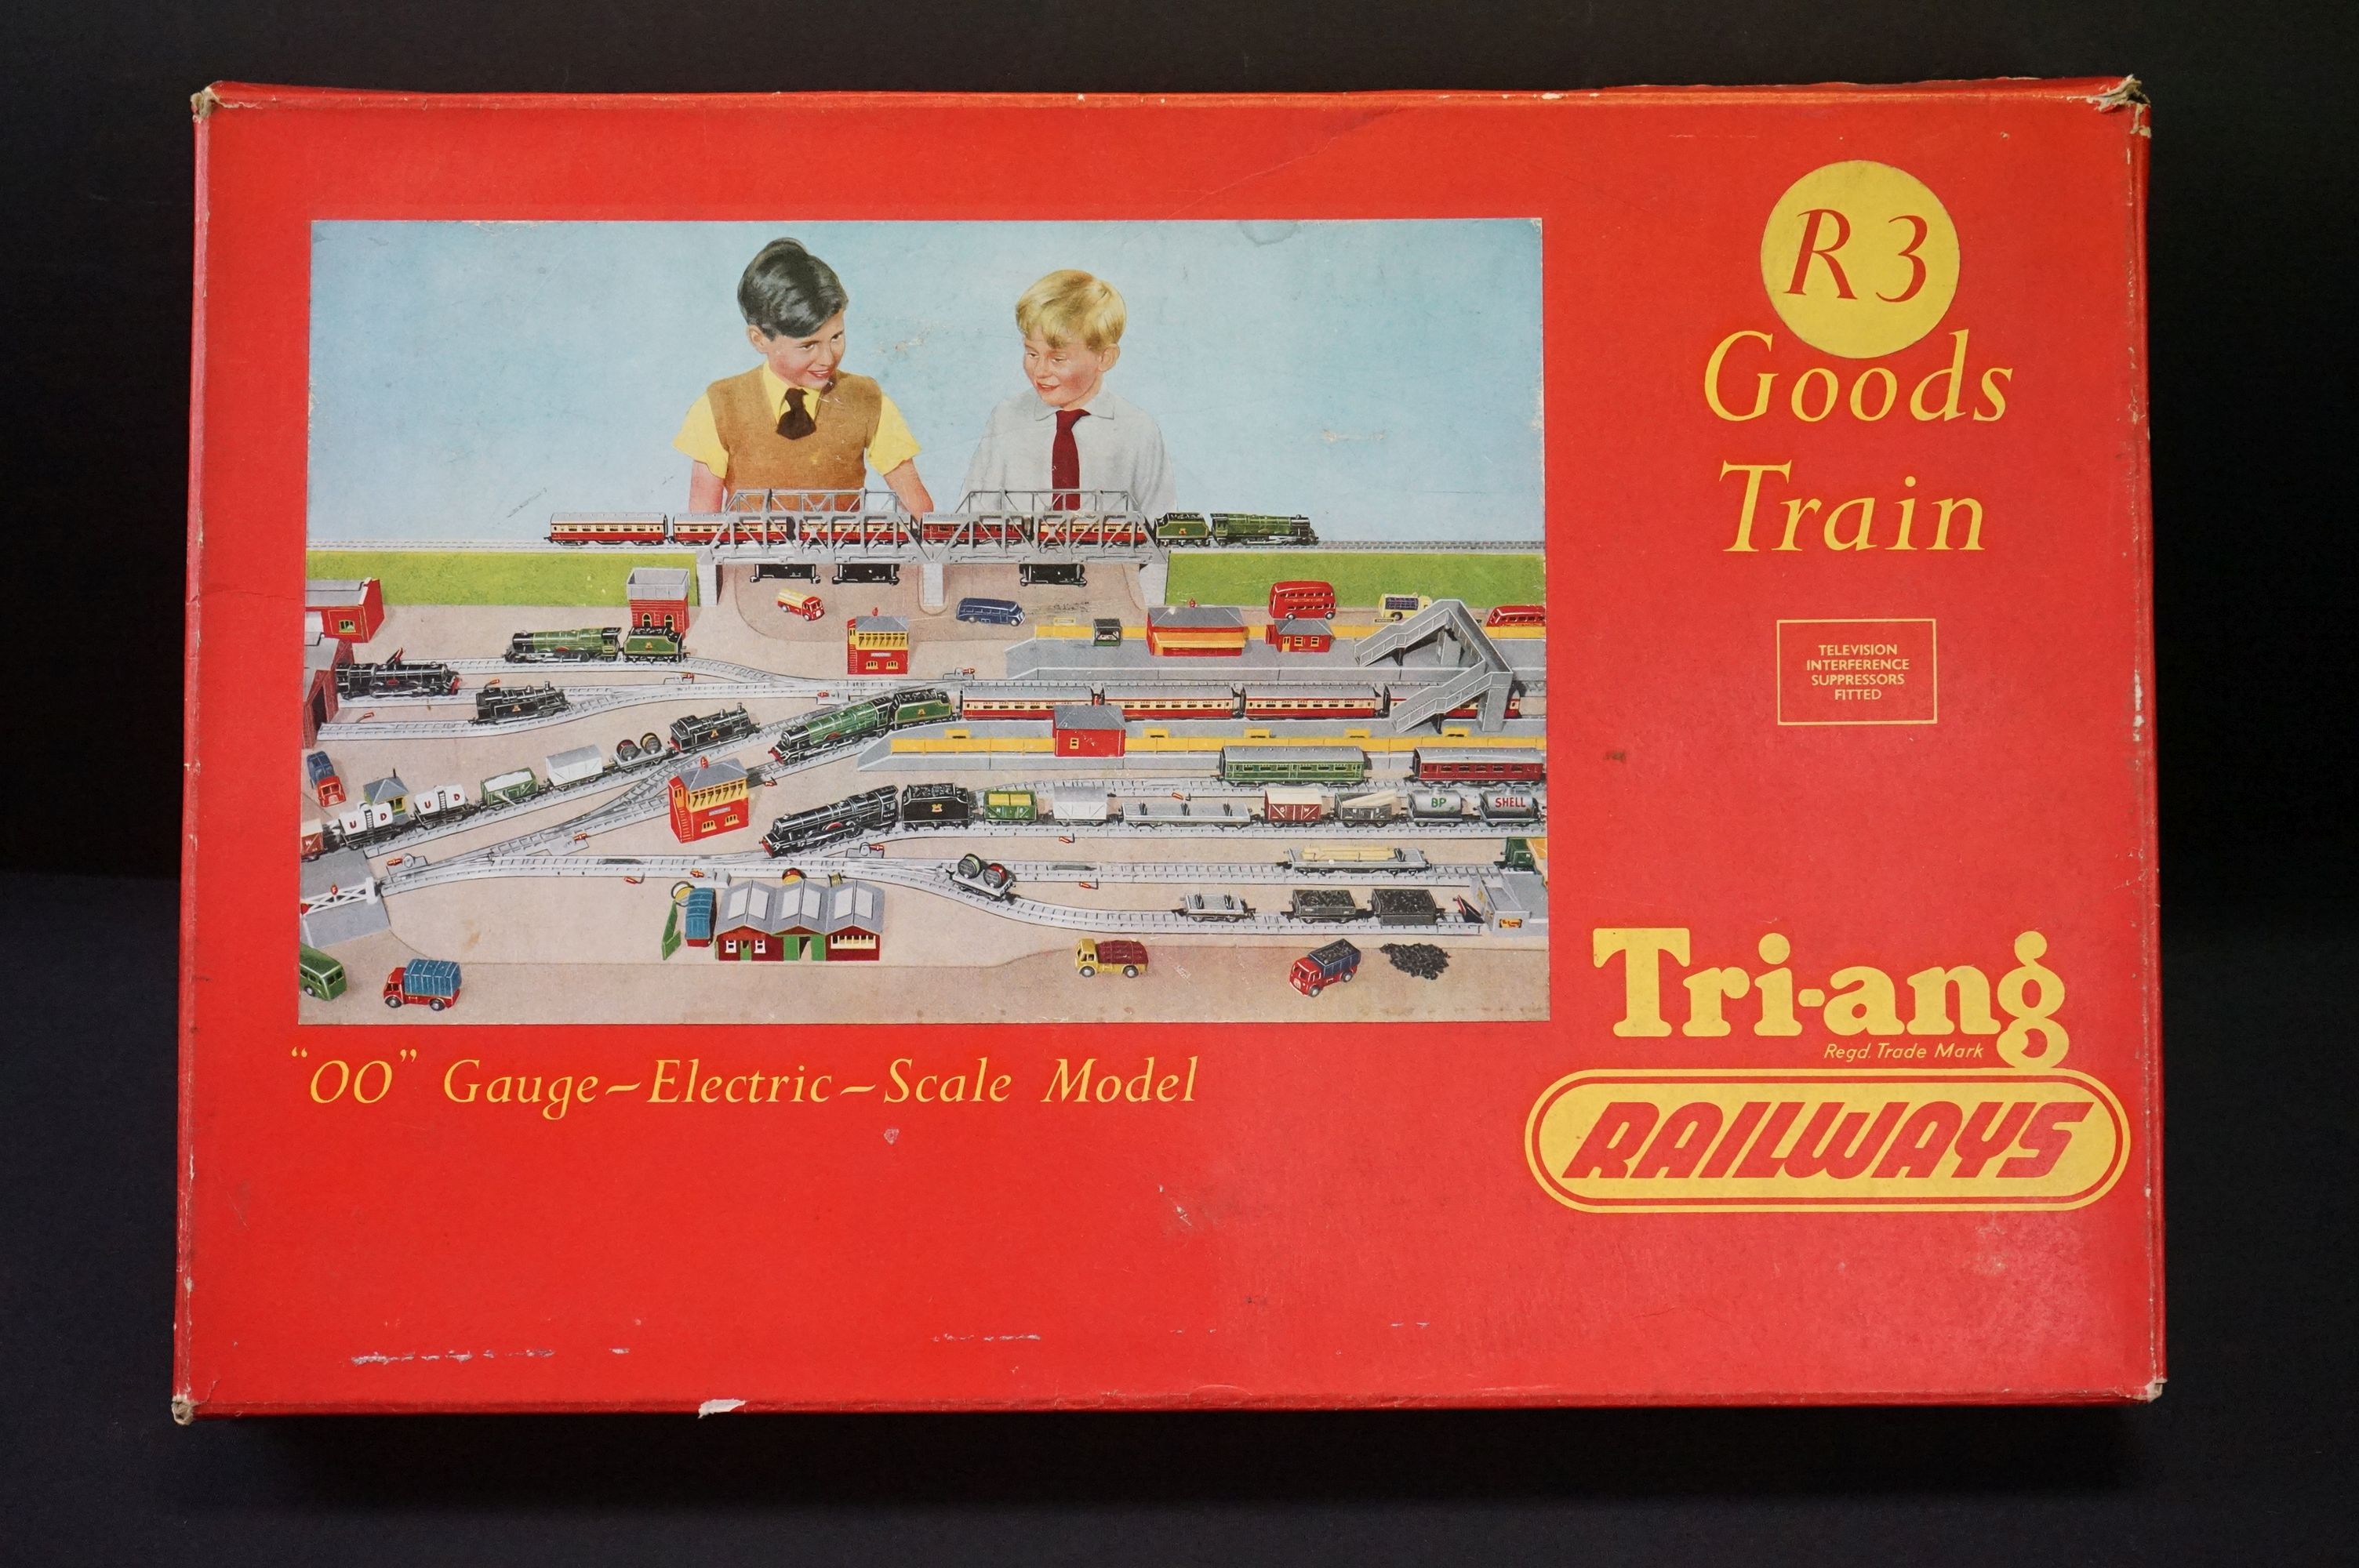 Two boxed Triang OO gauge train sets to include R3 Goods Train & R1X Passenger Train, both appear to - Image 14 of 14